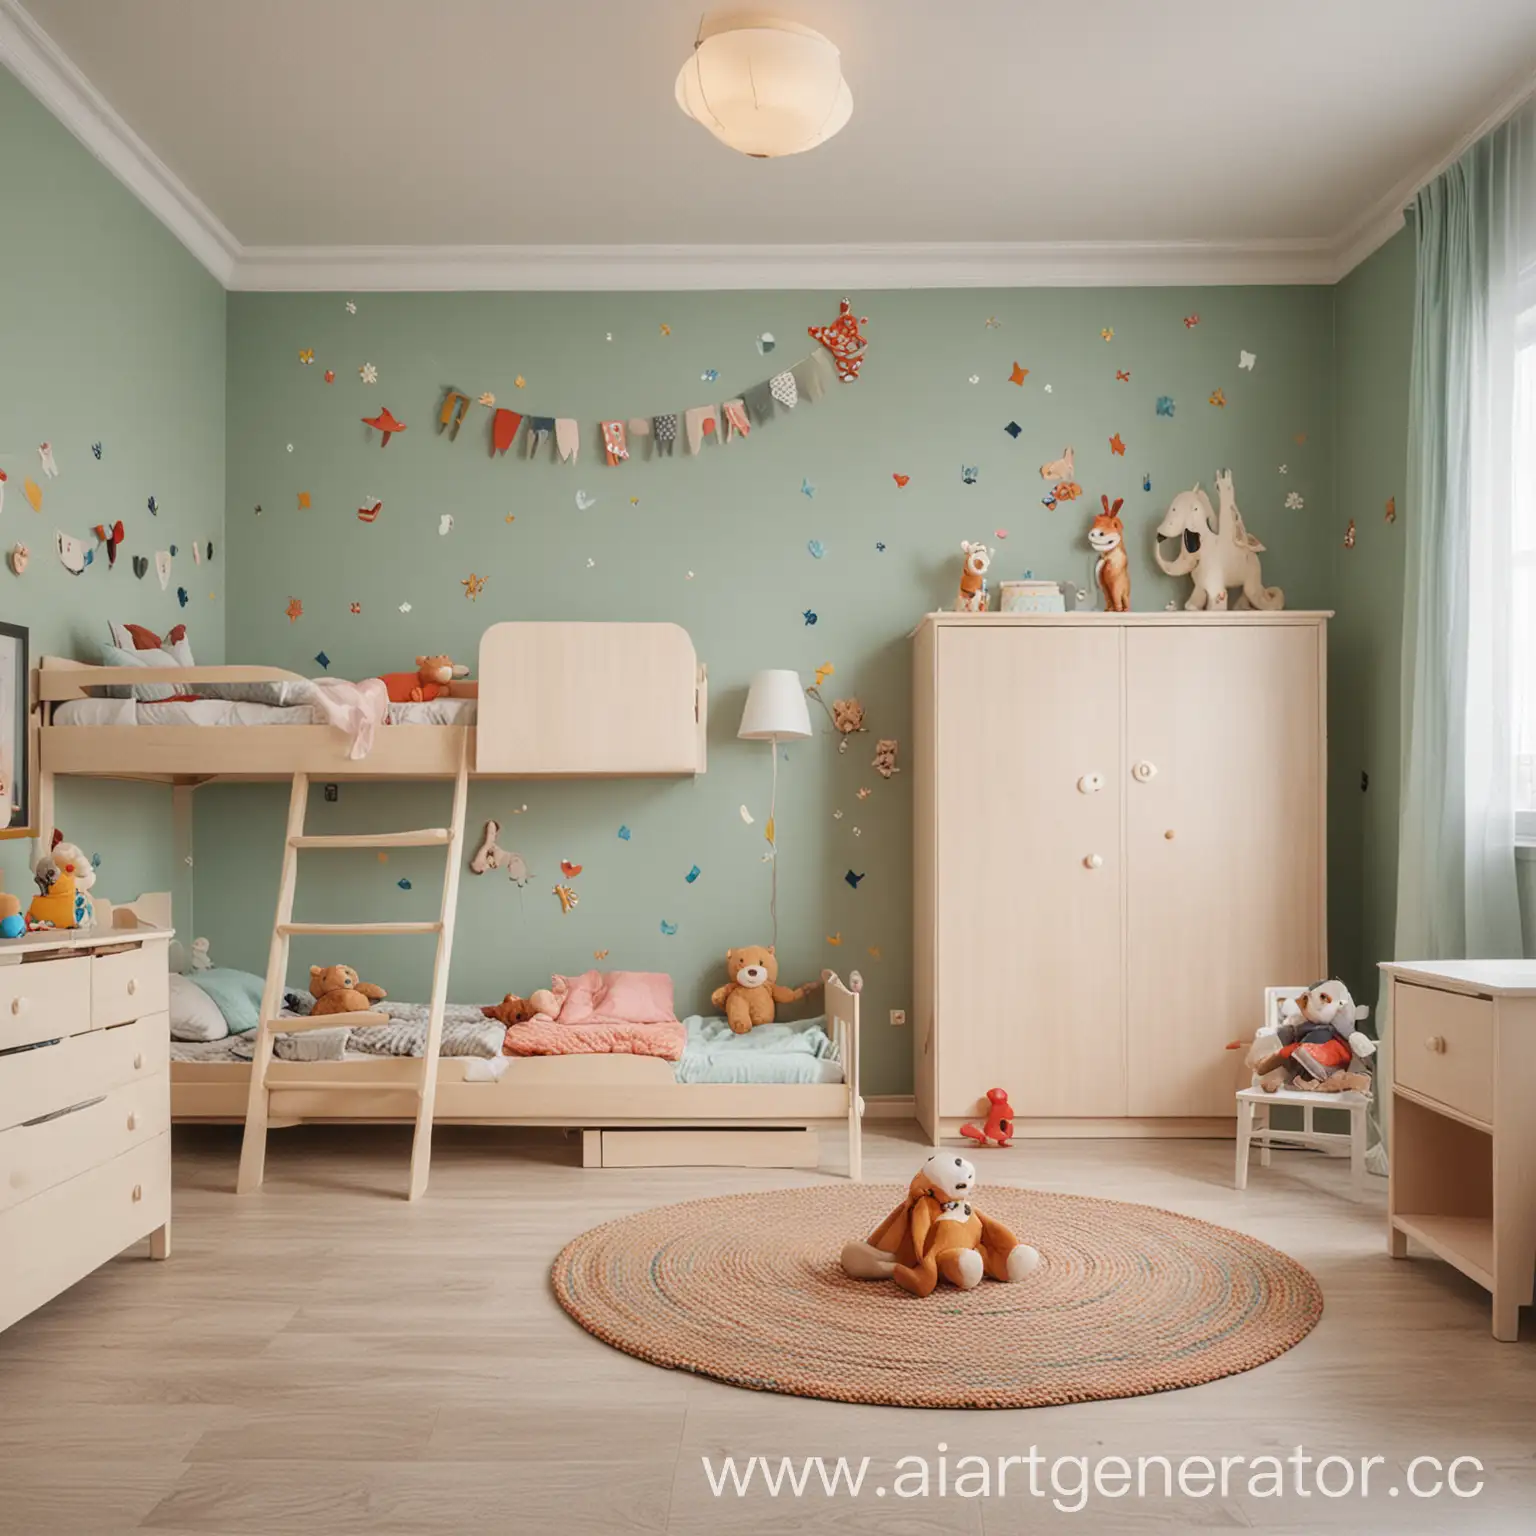 Playful-Kids-in-a-Colorful-Childrens-Room